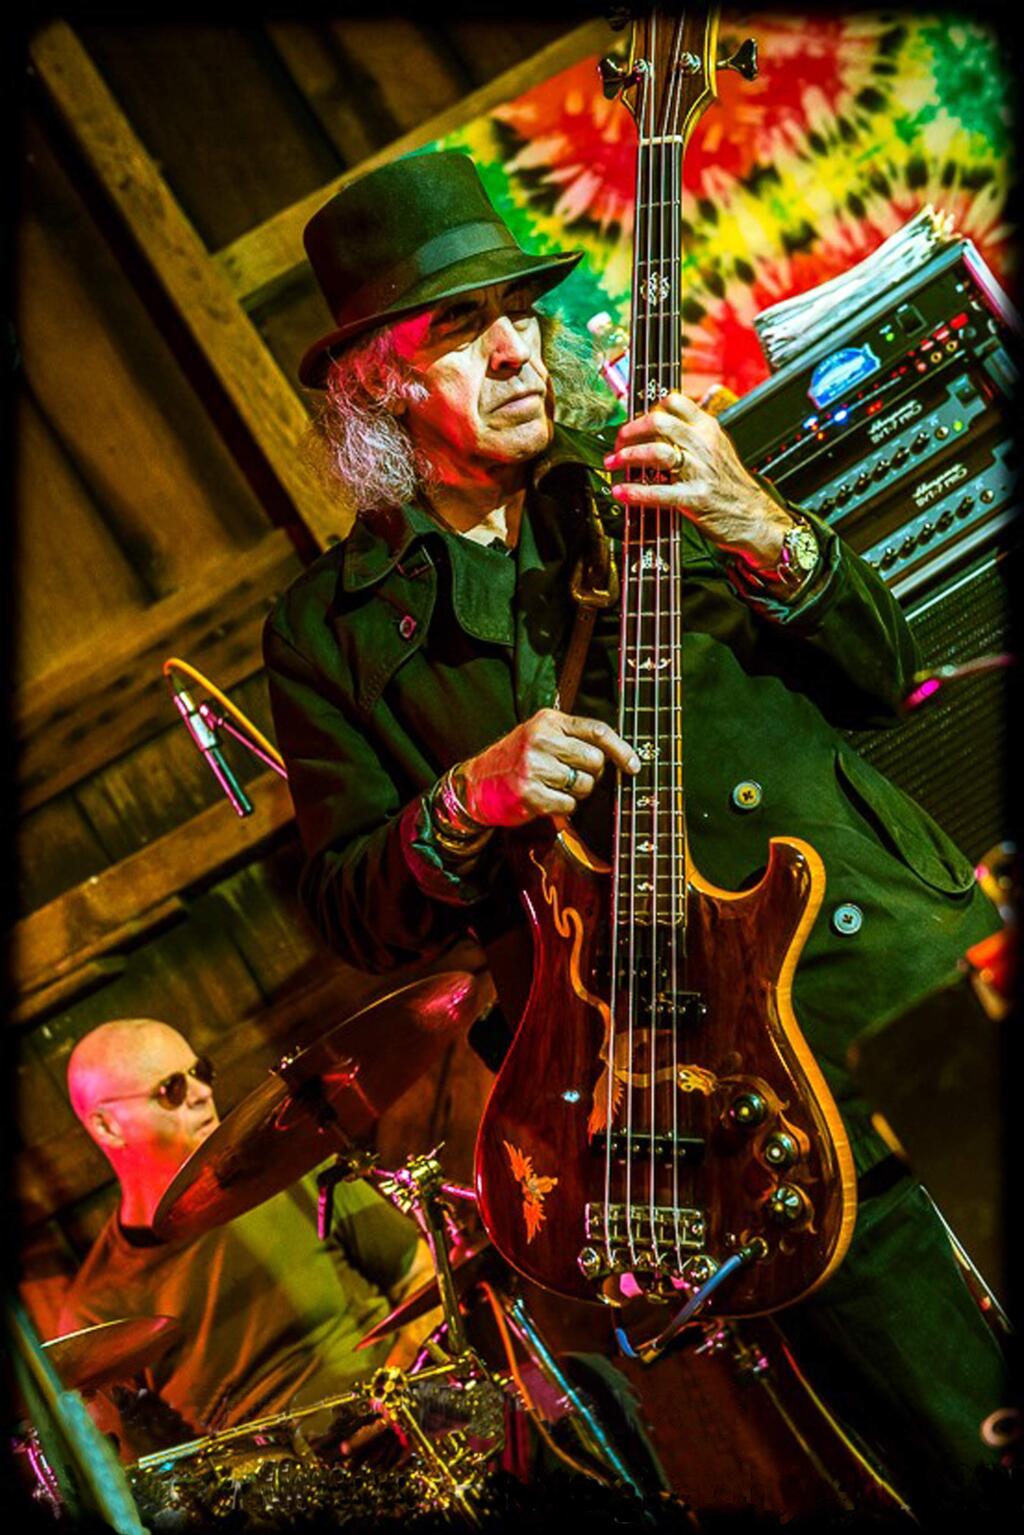 Pete Sears, longtime keyboardist and bassist who has played with artists including Rod Stewart, Jefferson Starship, Dr. John, John Lee Hooker, Hot Tuna and Bob Weir. He currently is a member of the band Moonalice. (BOB MINKIN)